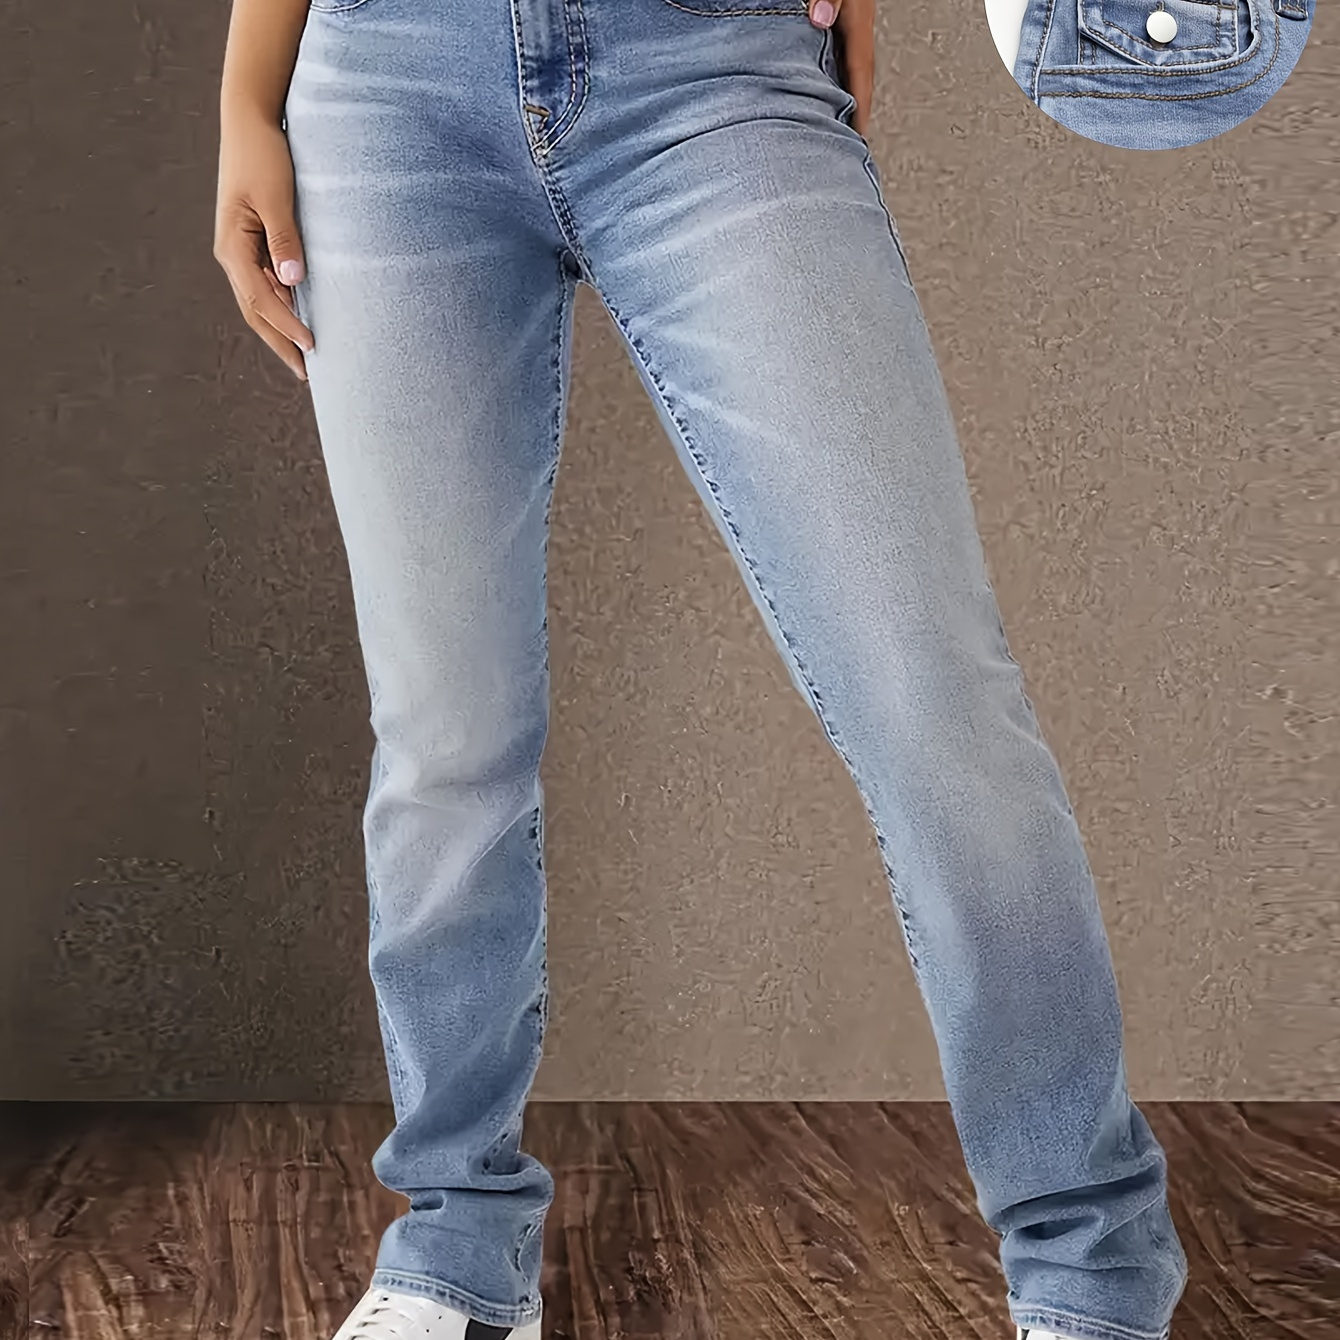 

Women's Casual High-waisted Jeans, Light Blue Denim, Straight Leg Style, Classic Design Double Buttons Whiskering